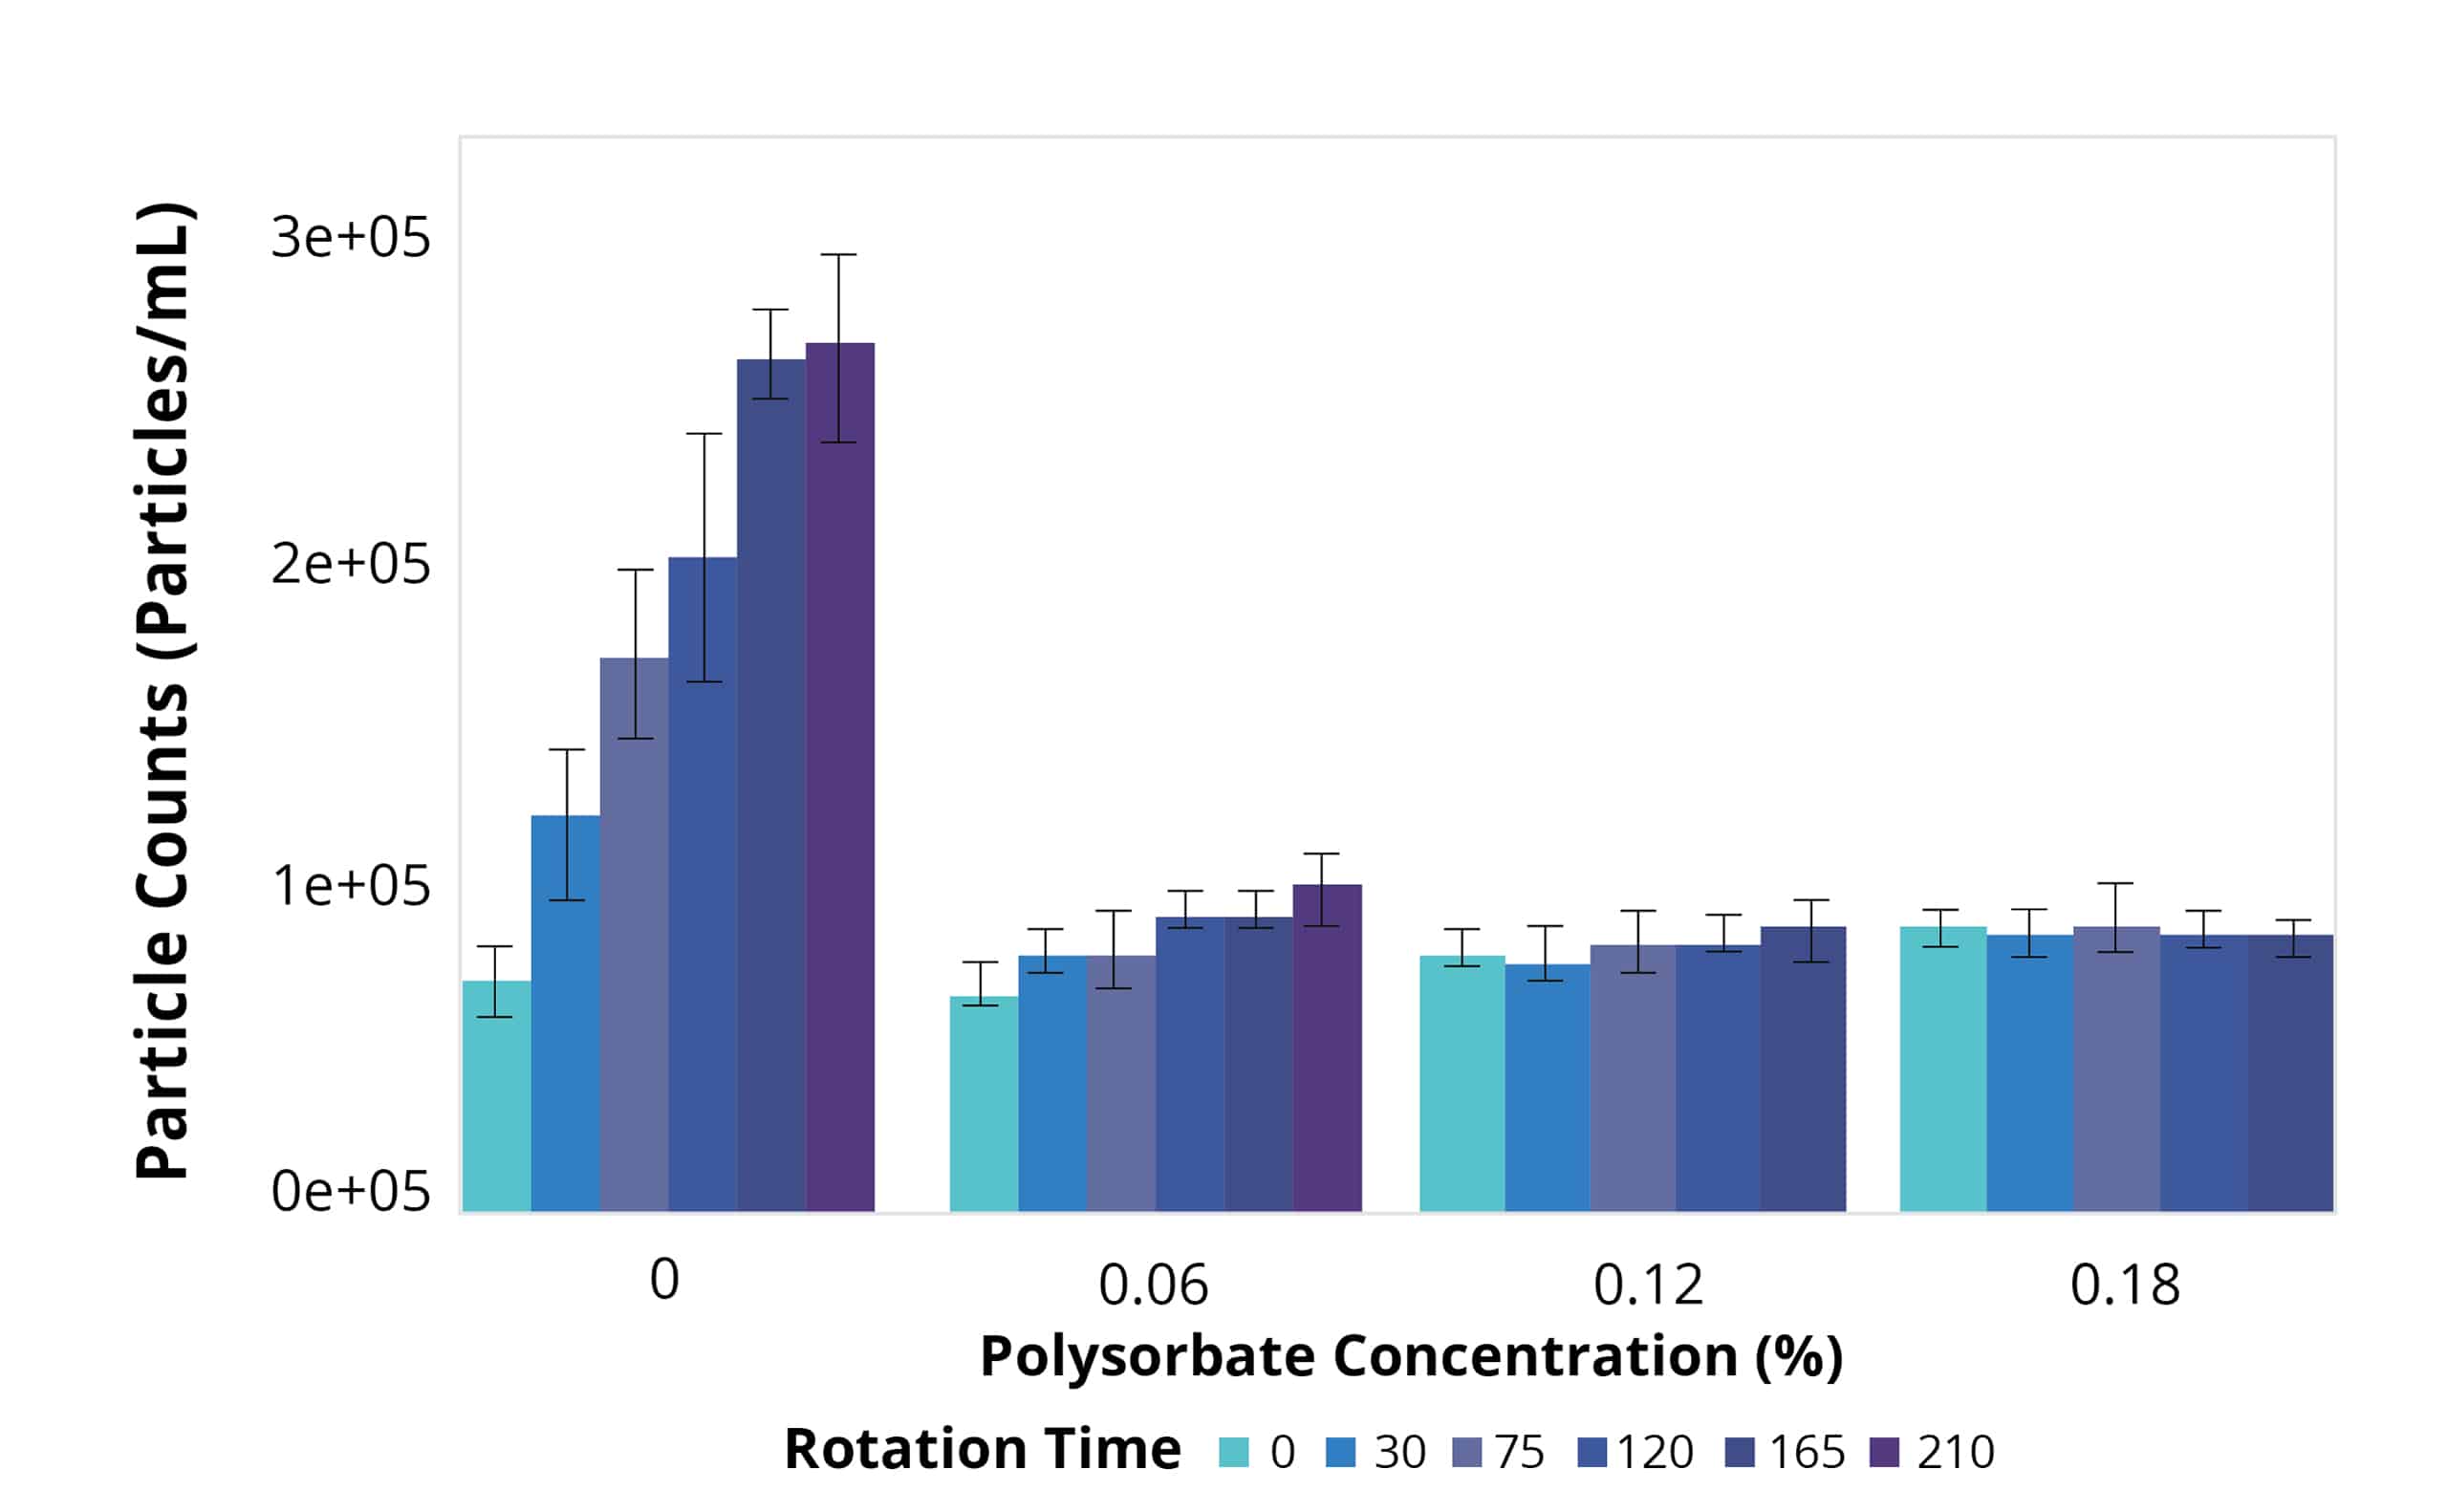 Screen formulation stability over time with various polysorbate concentrations effiiciently.